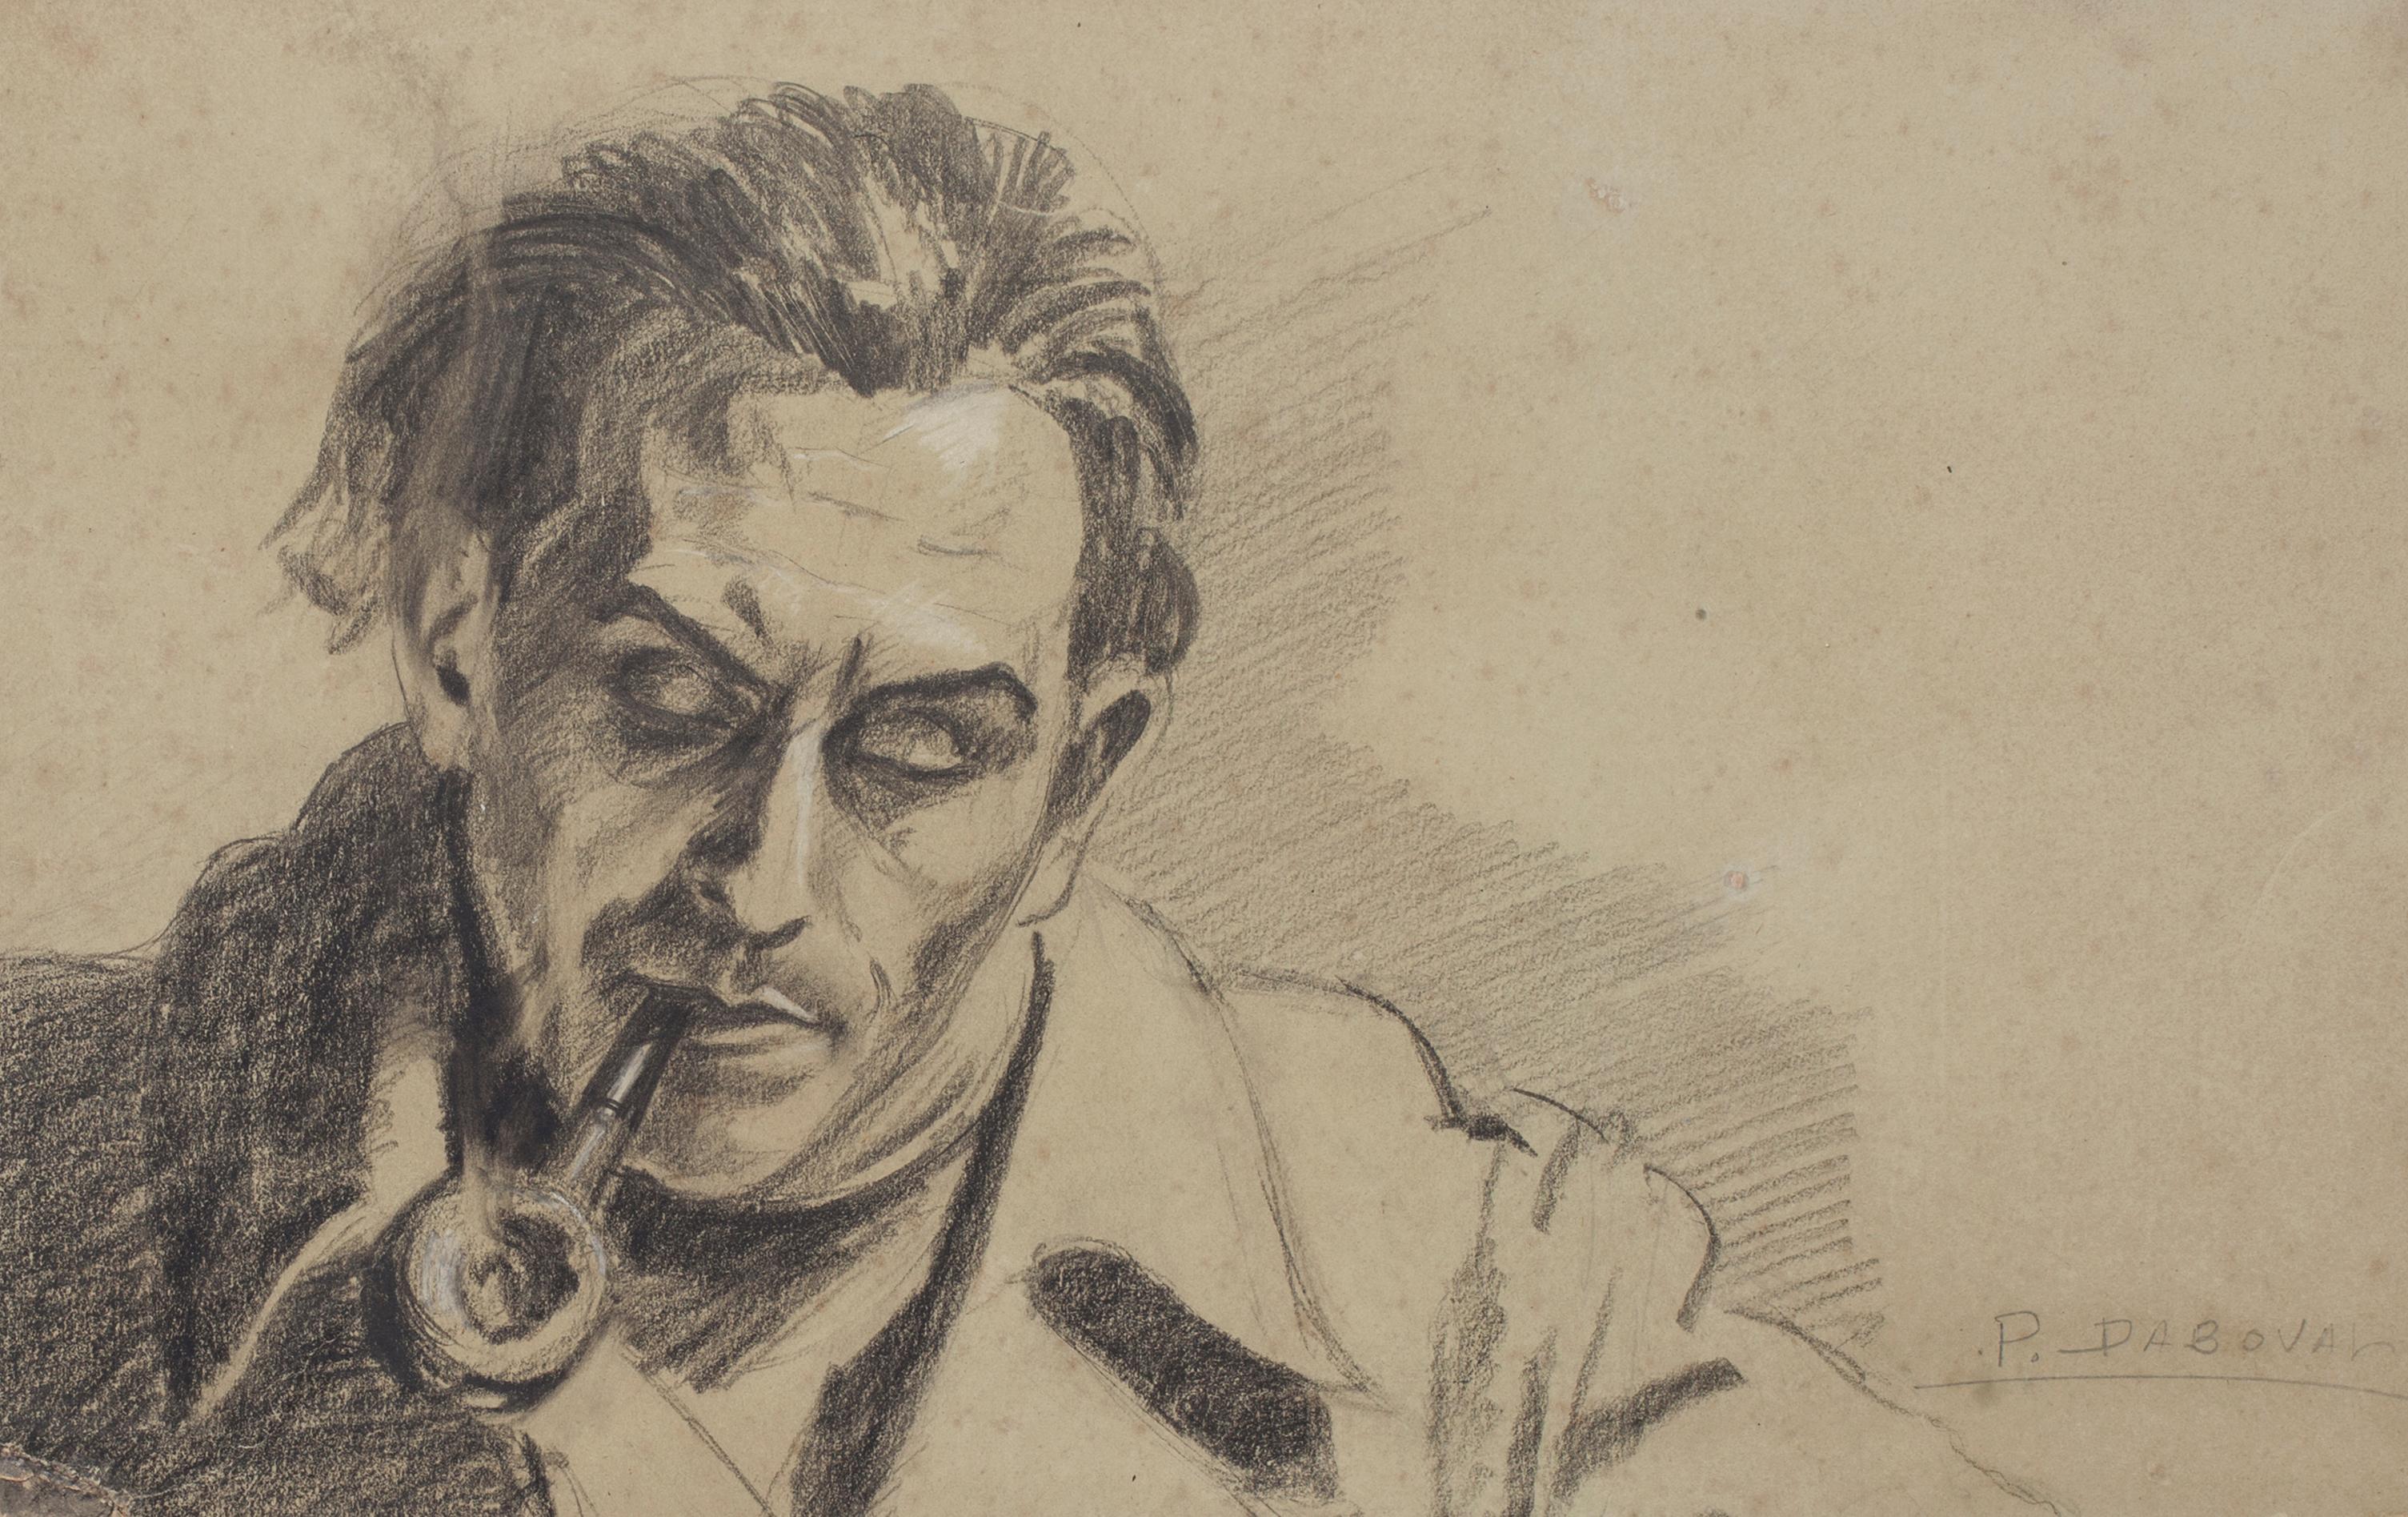 Portrait is an original drawing in pencil realized by Pierre Daboval. with the writing of  " Maifest, Alexander Liezenmayer" on the rear. The state of preservation of the artwork is very good. 

Sheet dimension: 31.5 x 20 cm

The artwork represents